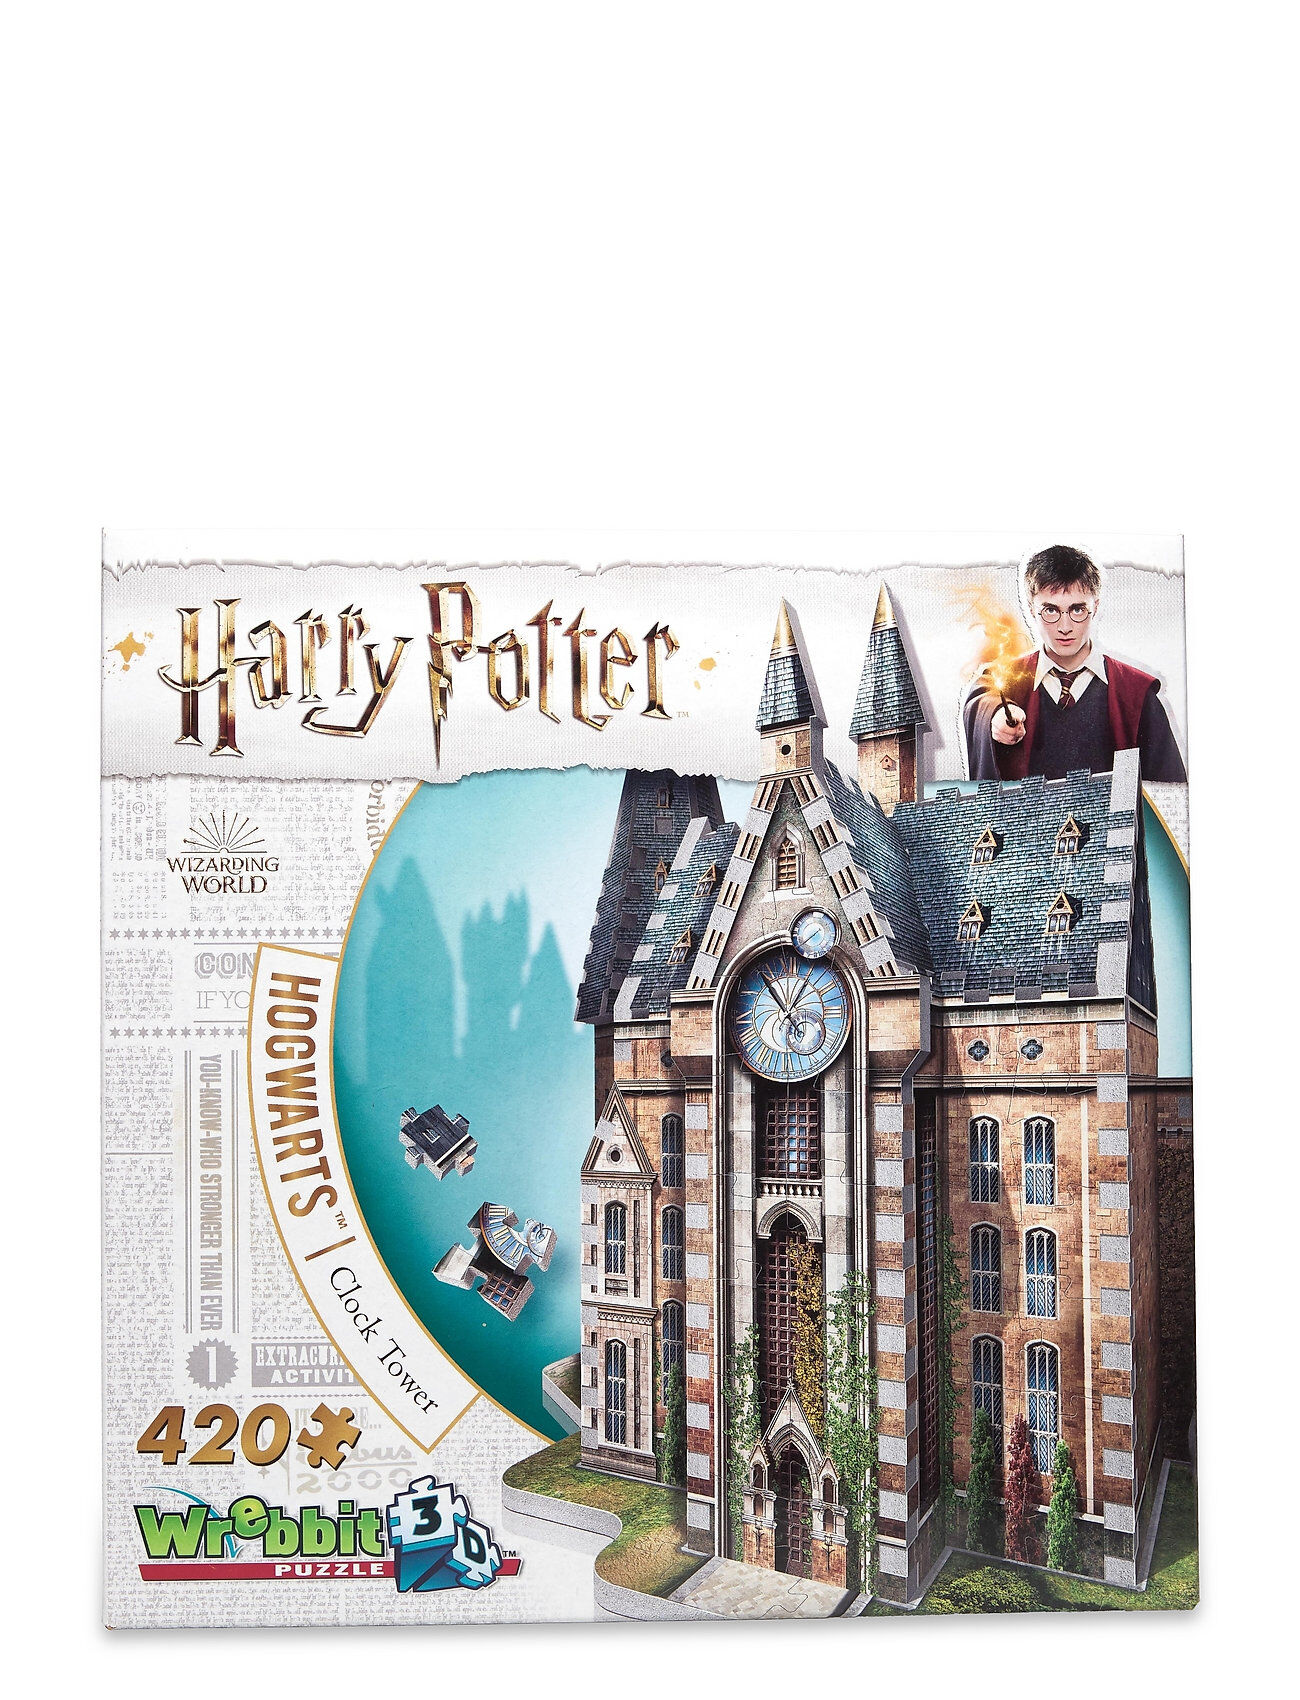 Martinex Hogwarts Clock Tower Toys Puzzles And Games Puzzles Multi/mønstret Martinex